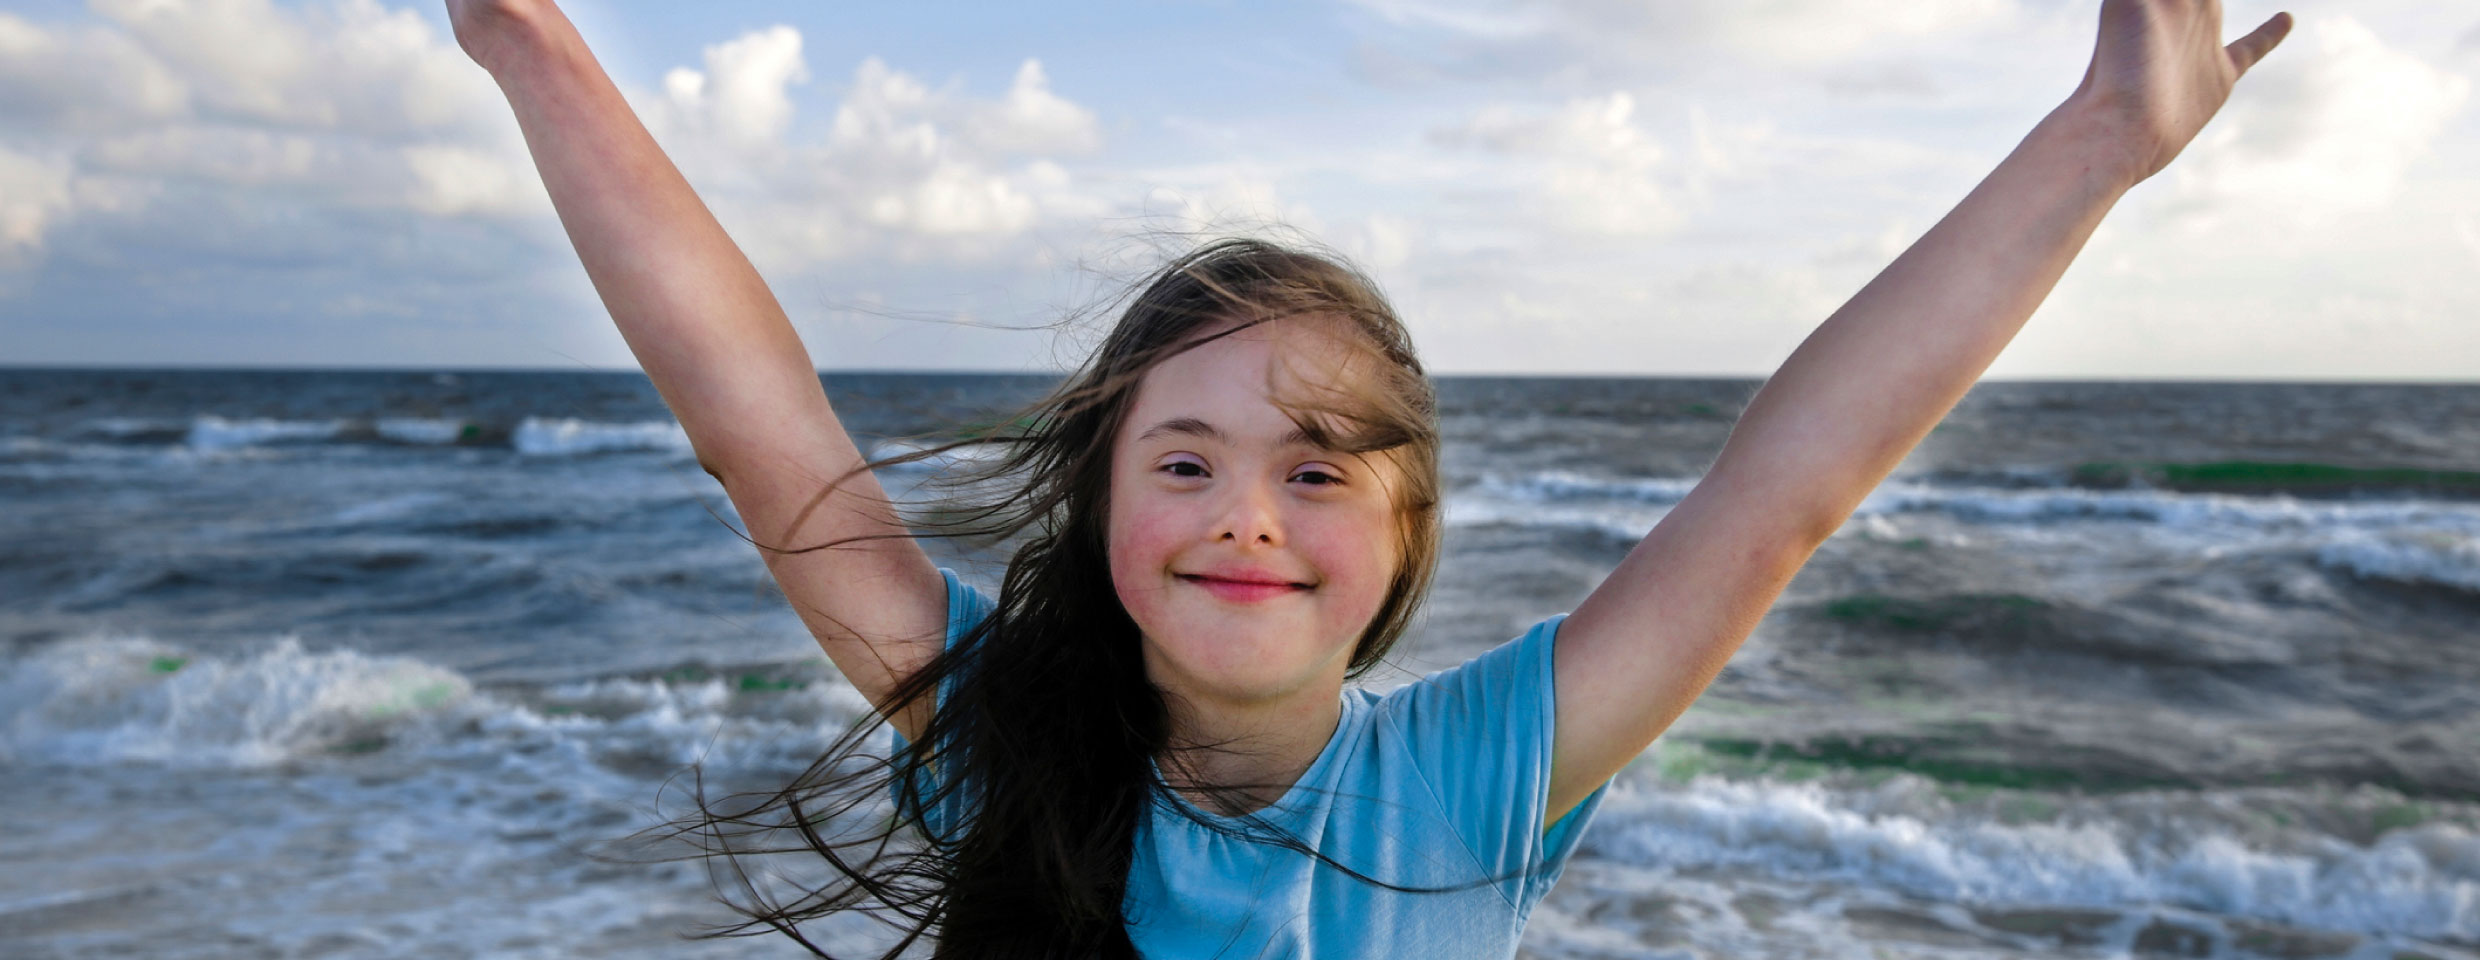 Young girl with arms raised at beach, smiling